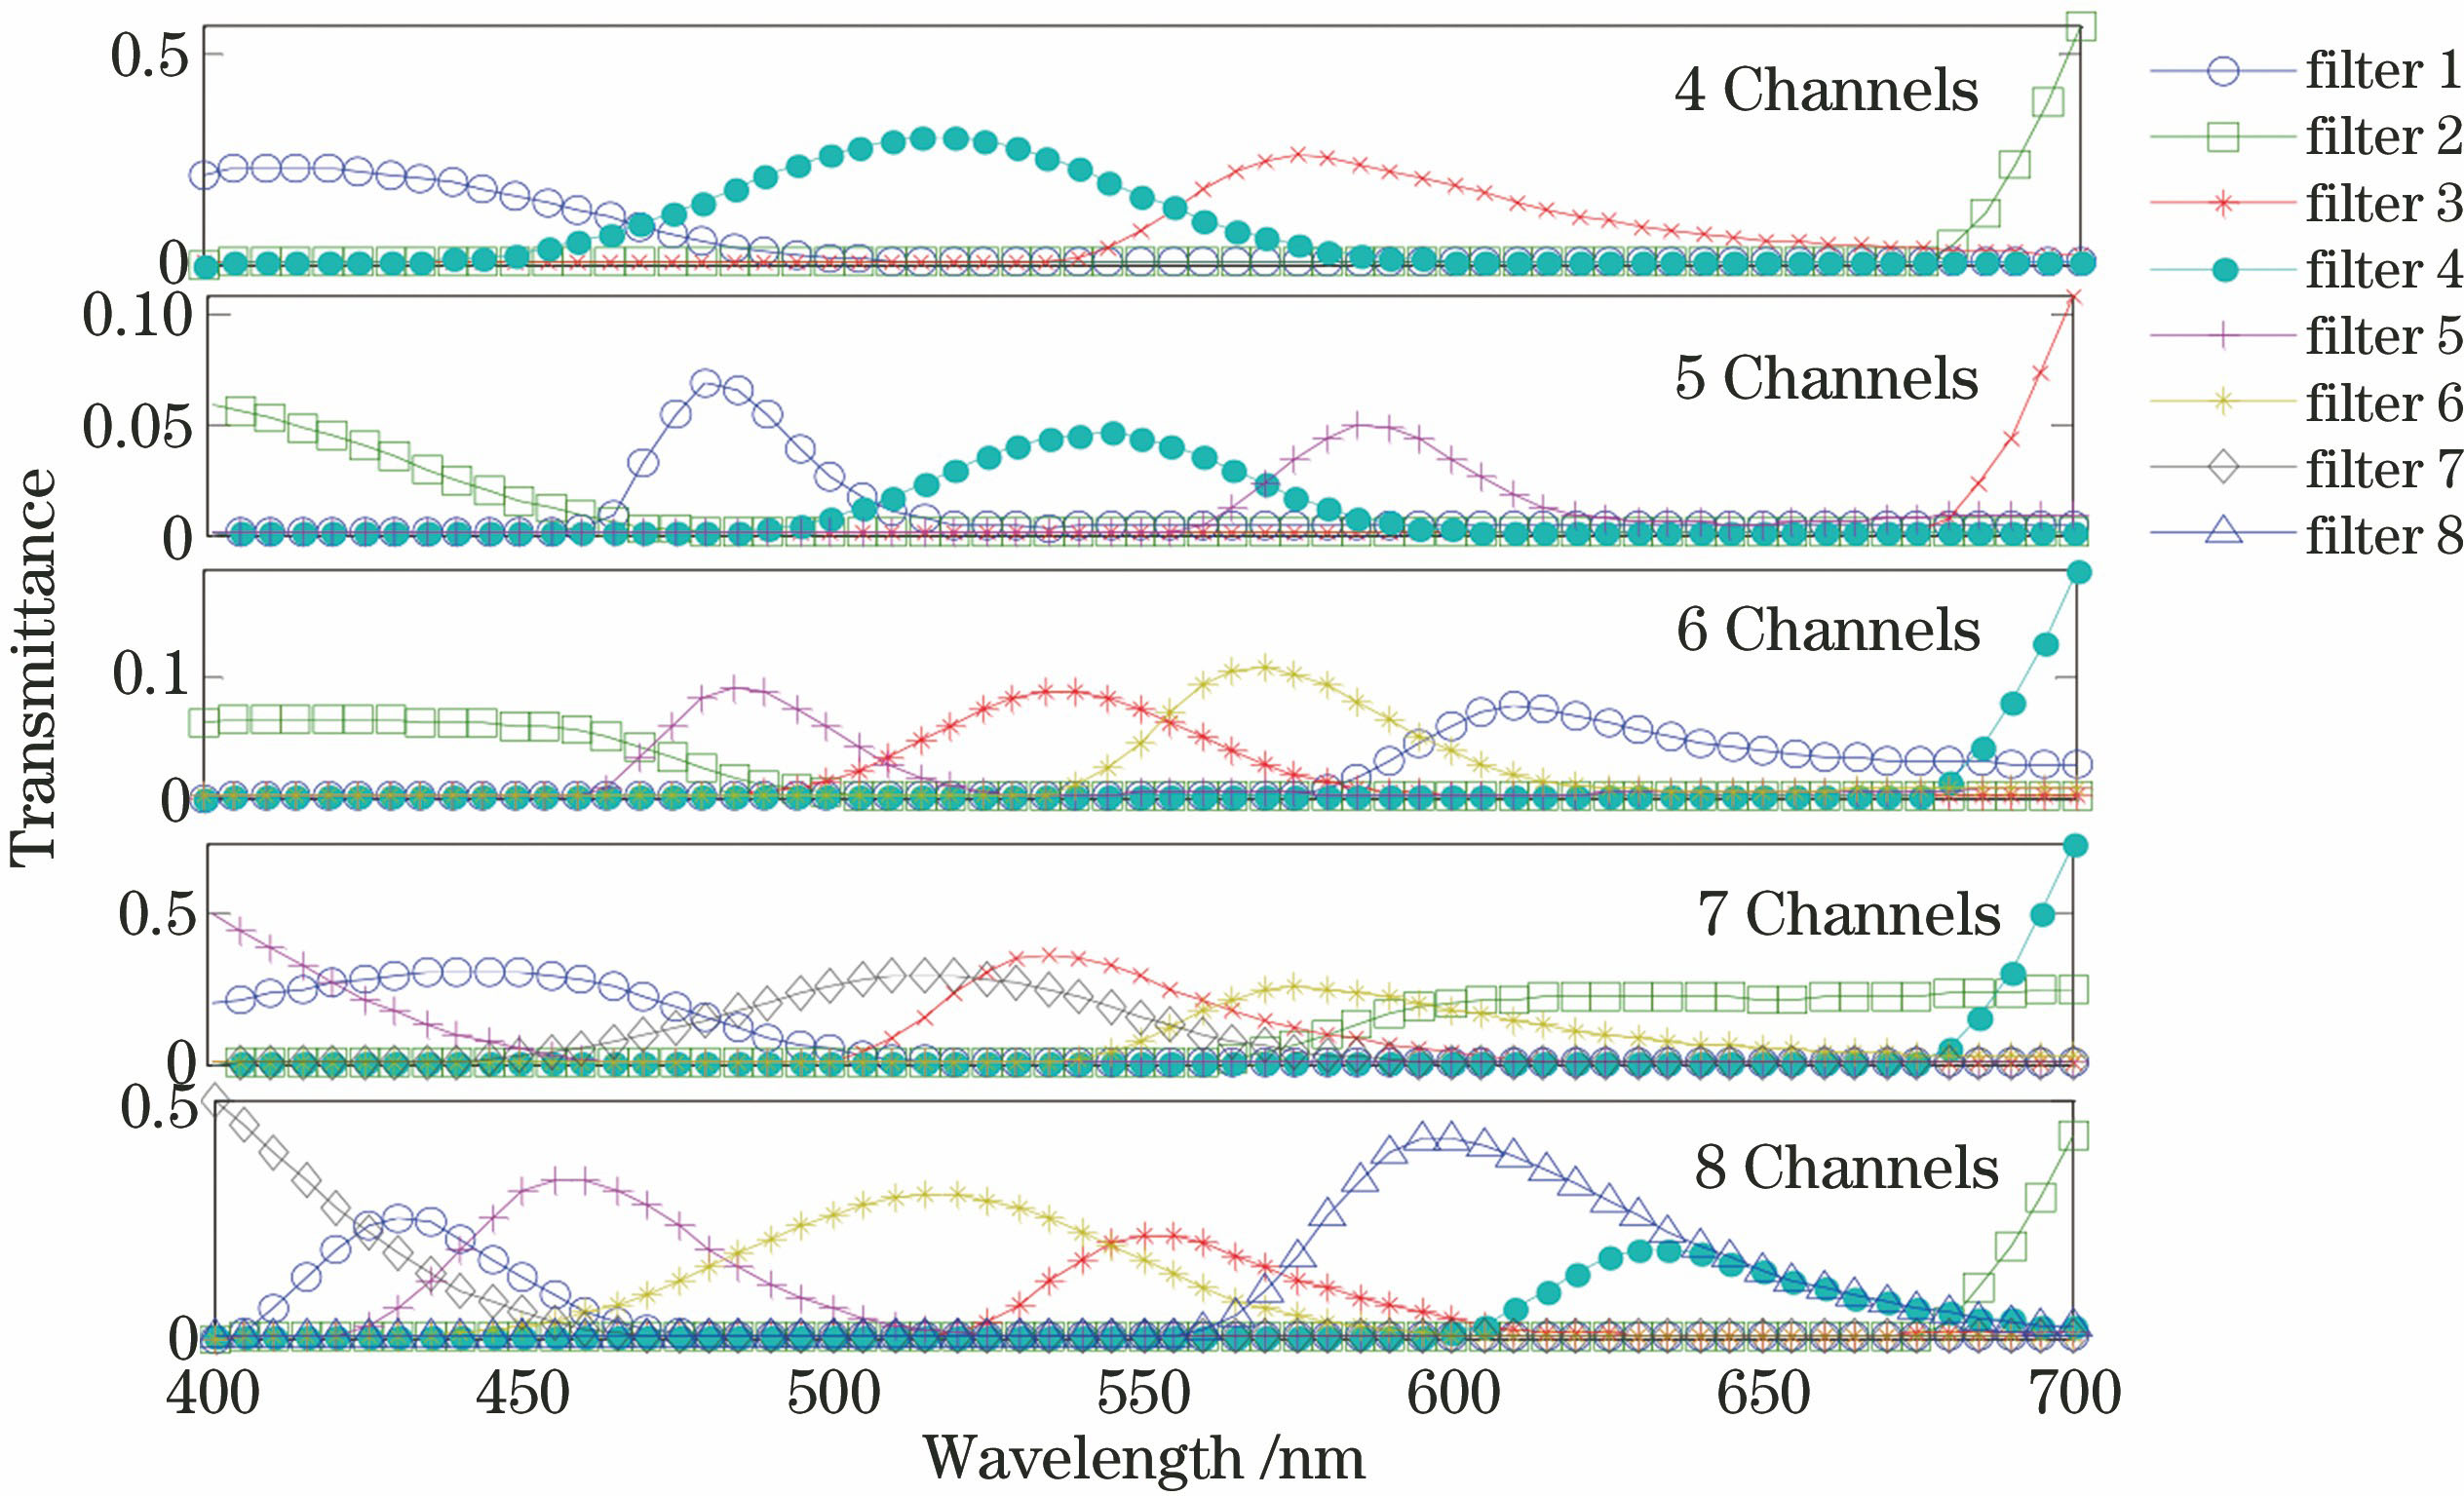 Optimal filters at 4-8 channels